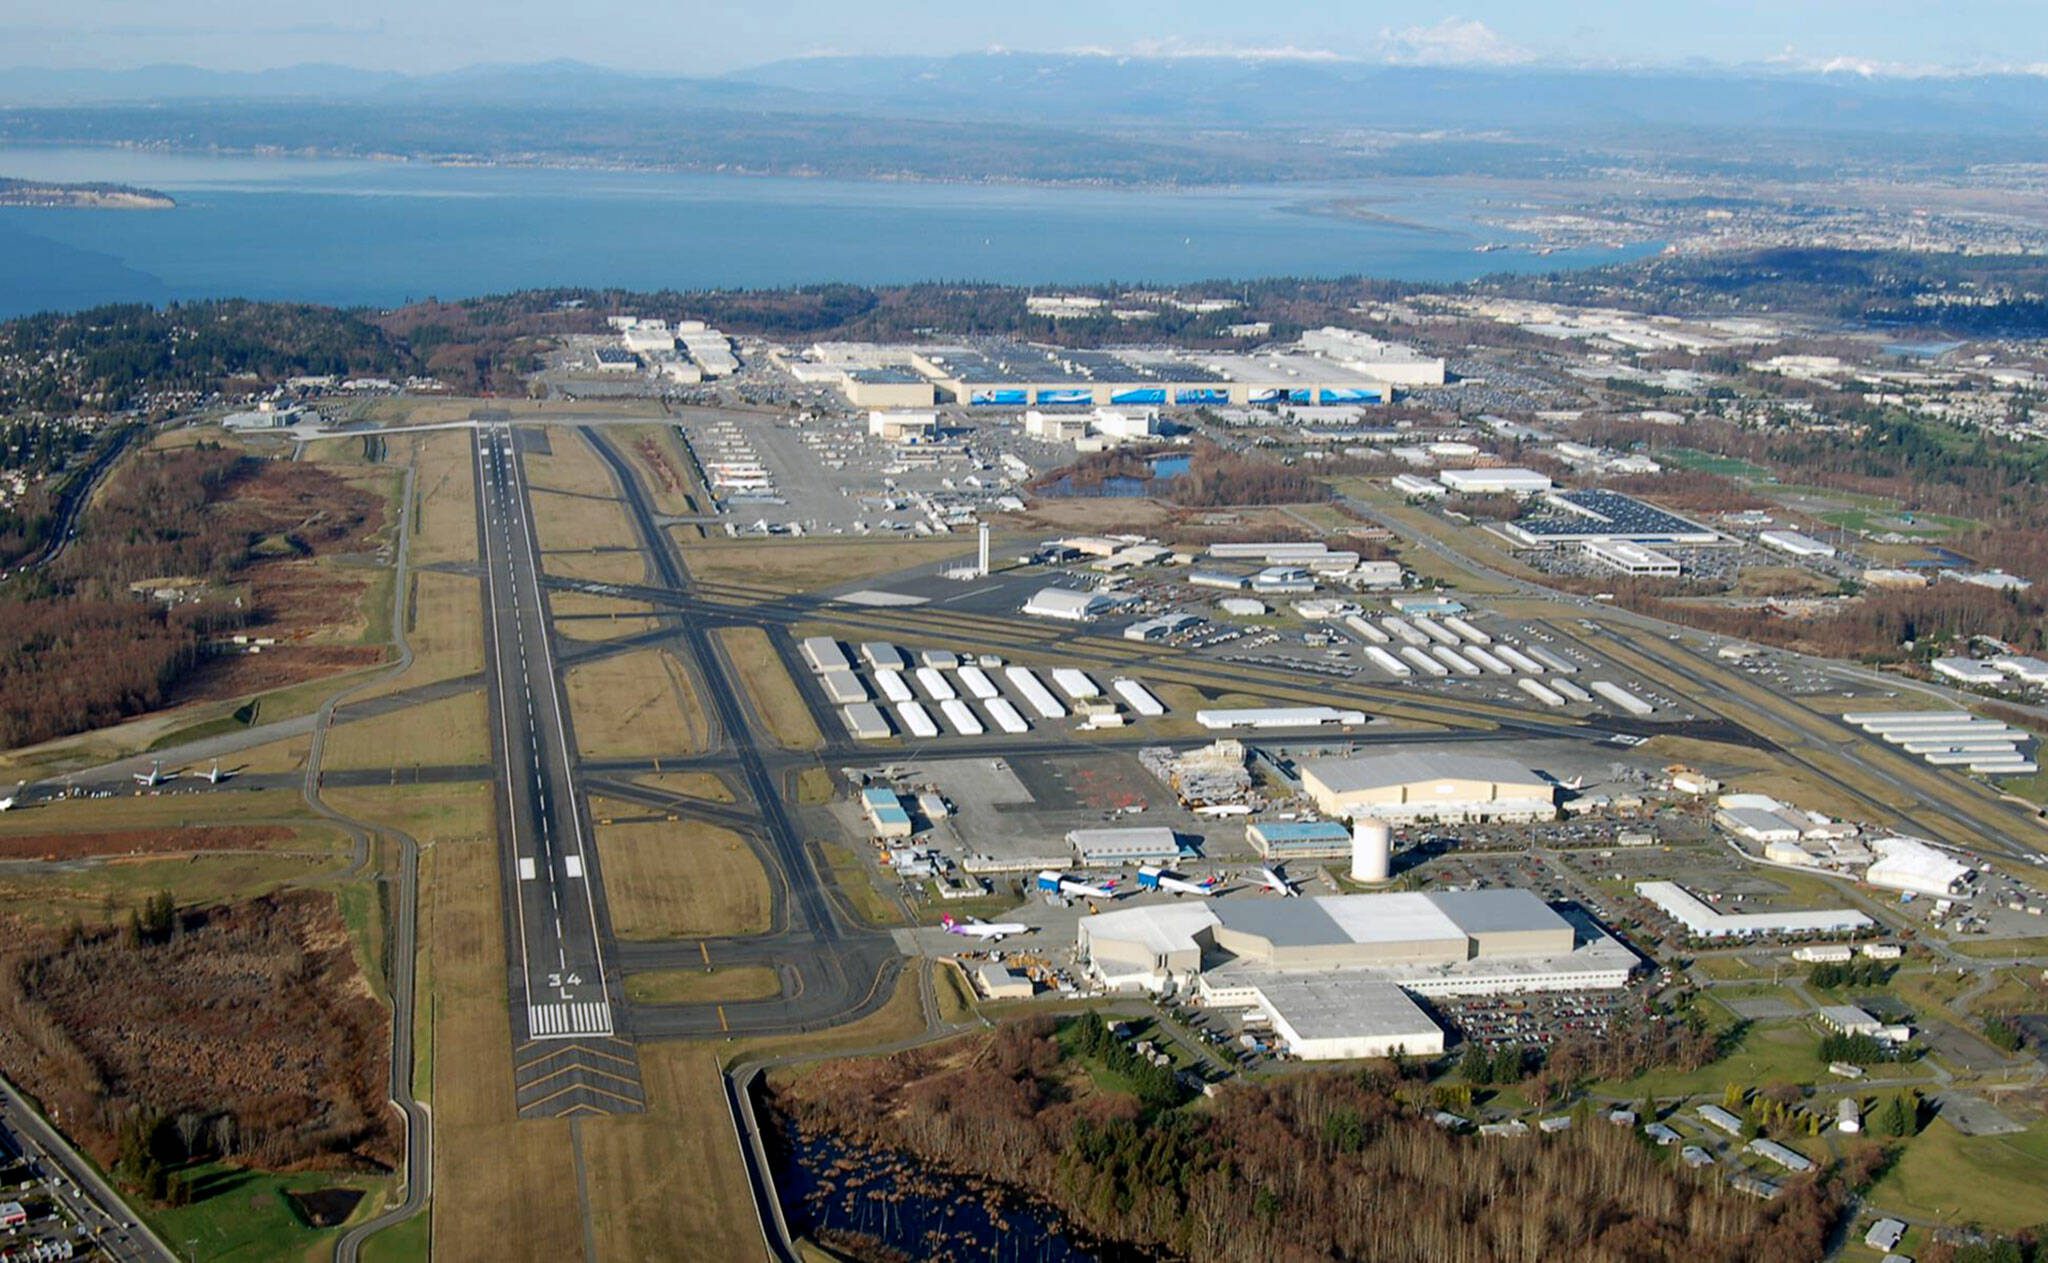 Looking north, an aerial view of Paine Field in Everett, Washington. (Paine Field / Snohomish County)